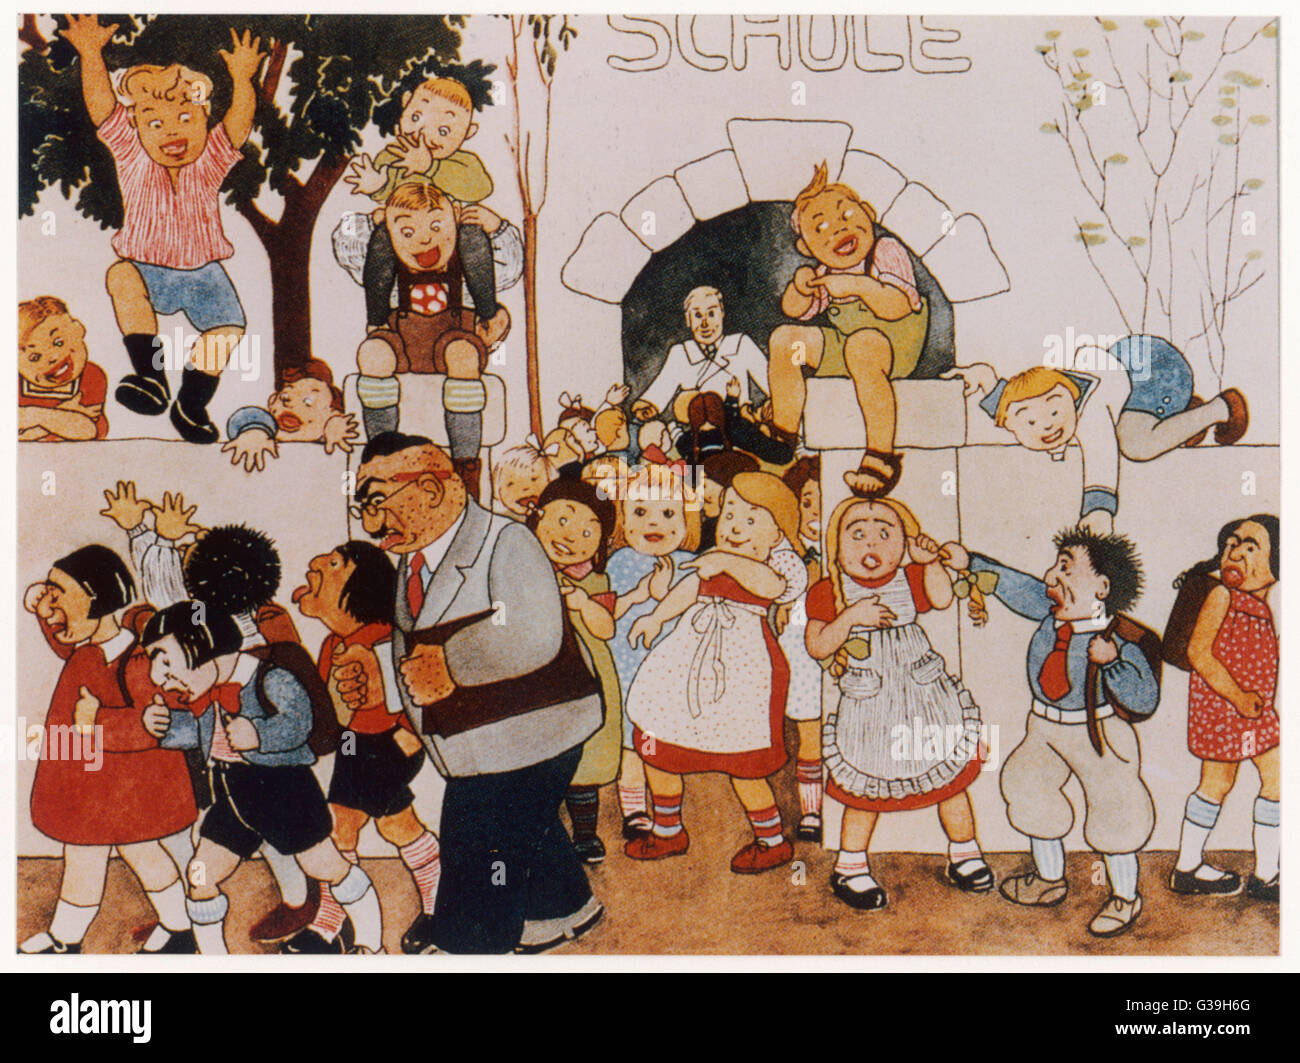 Nazi-inspired schoolbook  depicting ugly Jewish school  children and their teacher  being expelled from school  taunted by German children.      Date: 1935 Stock Photo